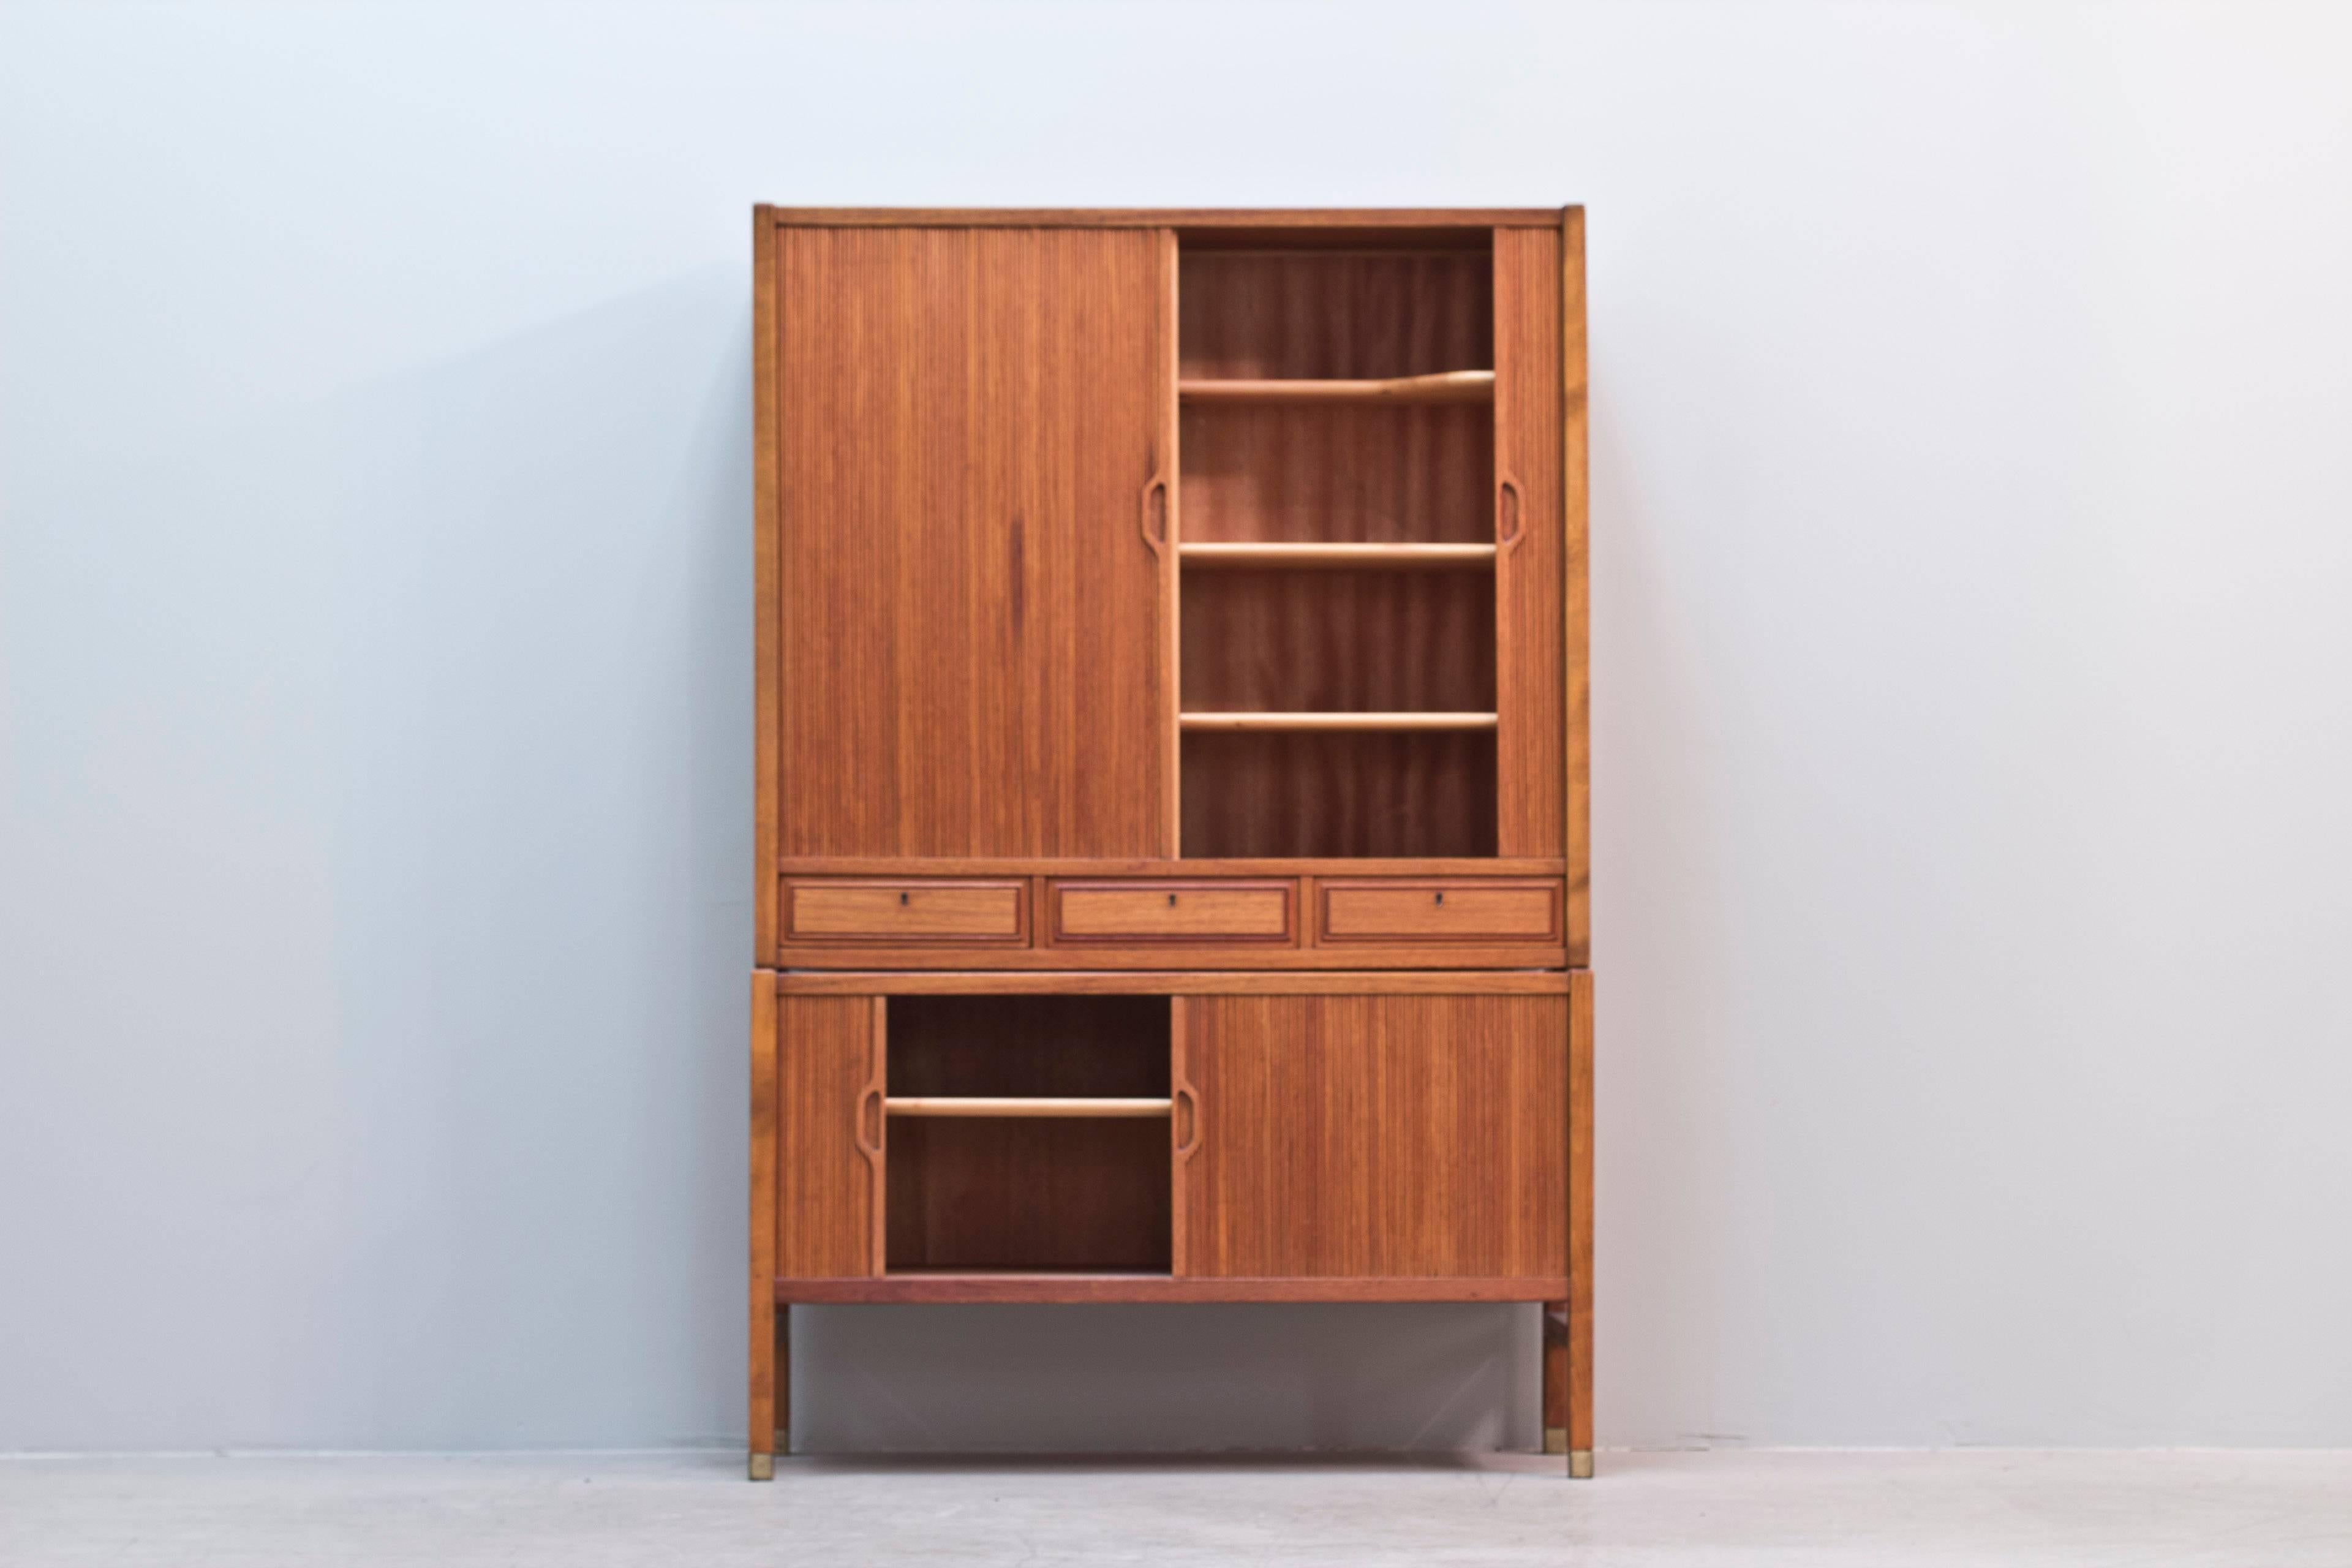 Cabinet with beautiful crafted veneer work in teak with oak frame details, legs with brass endings and three front drawers with original key.
Designed by Carl-Axel Acking, maker Bodafors, Sweden.